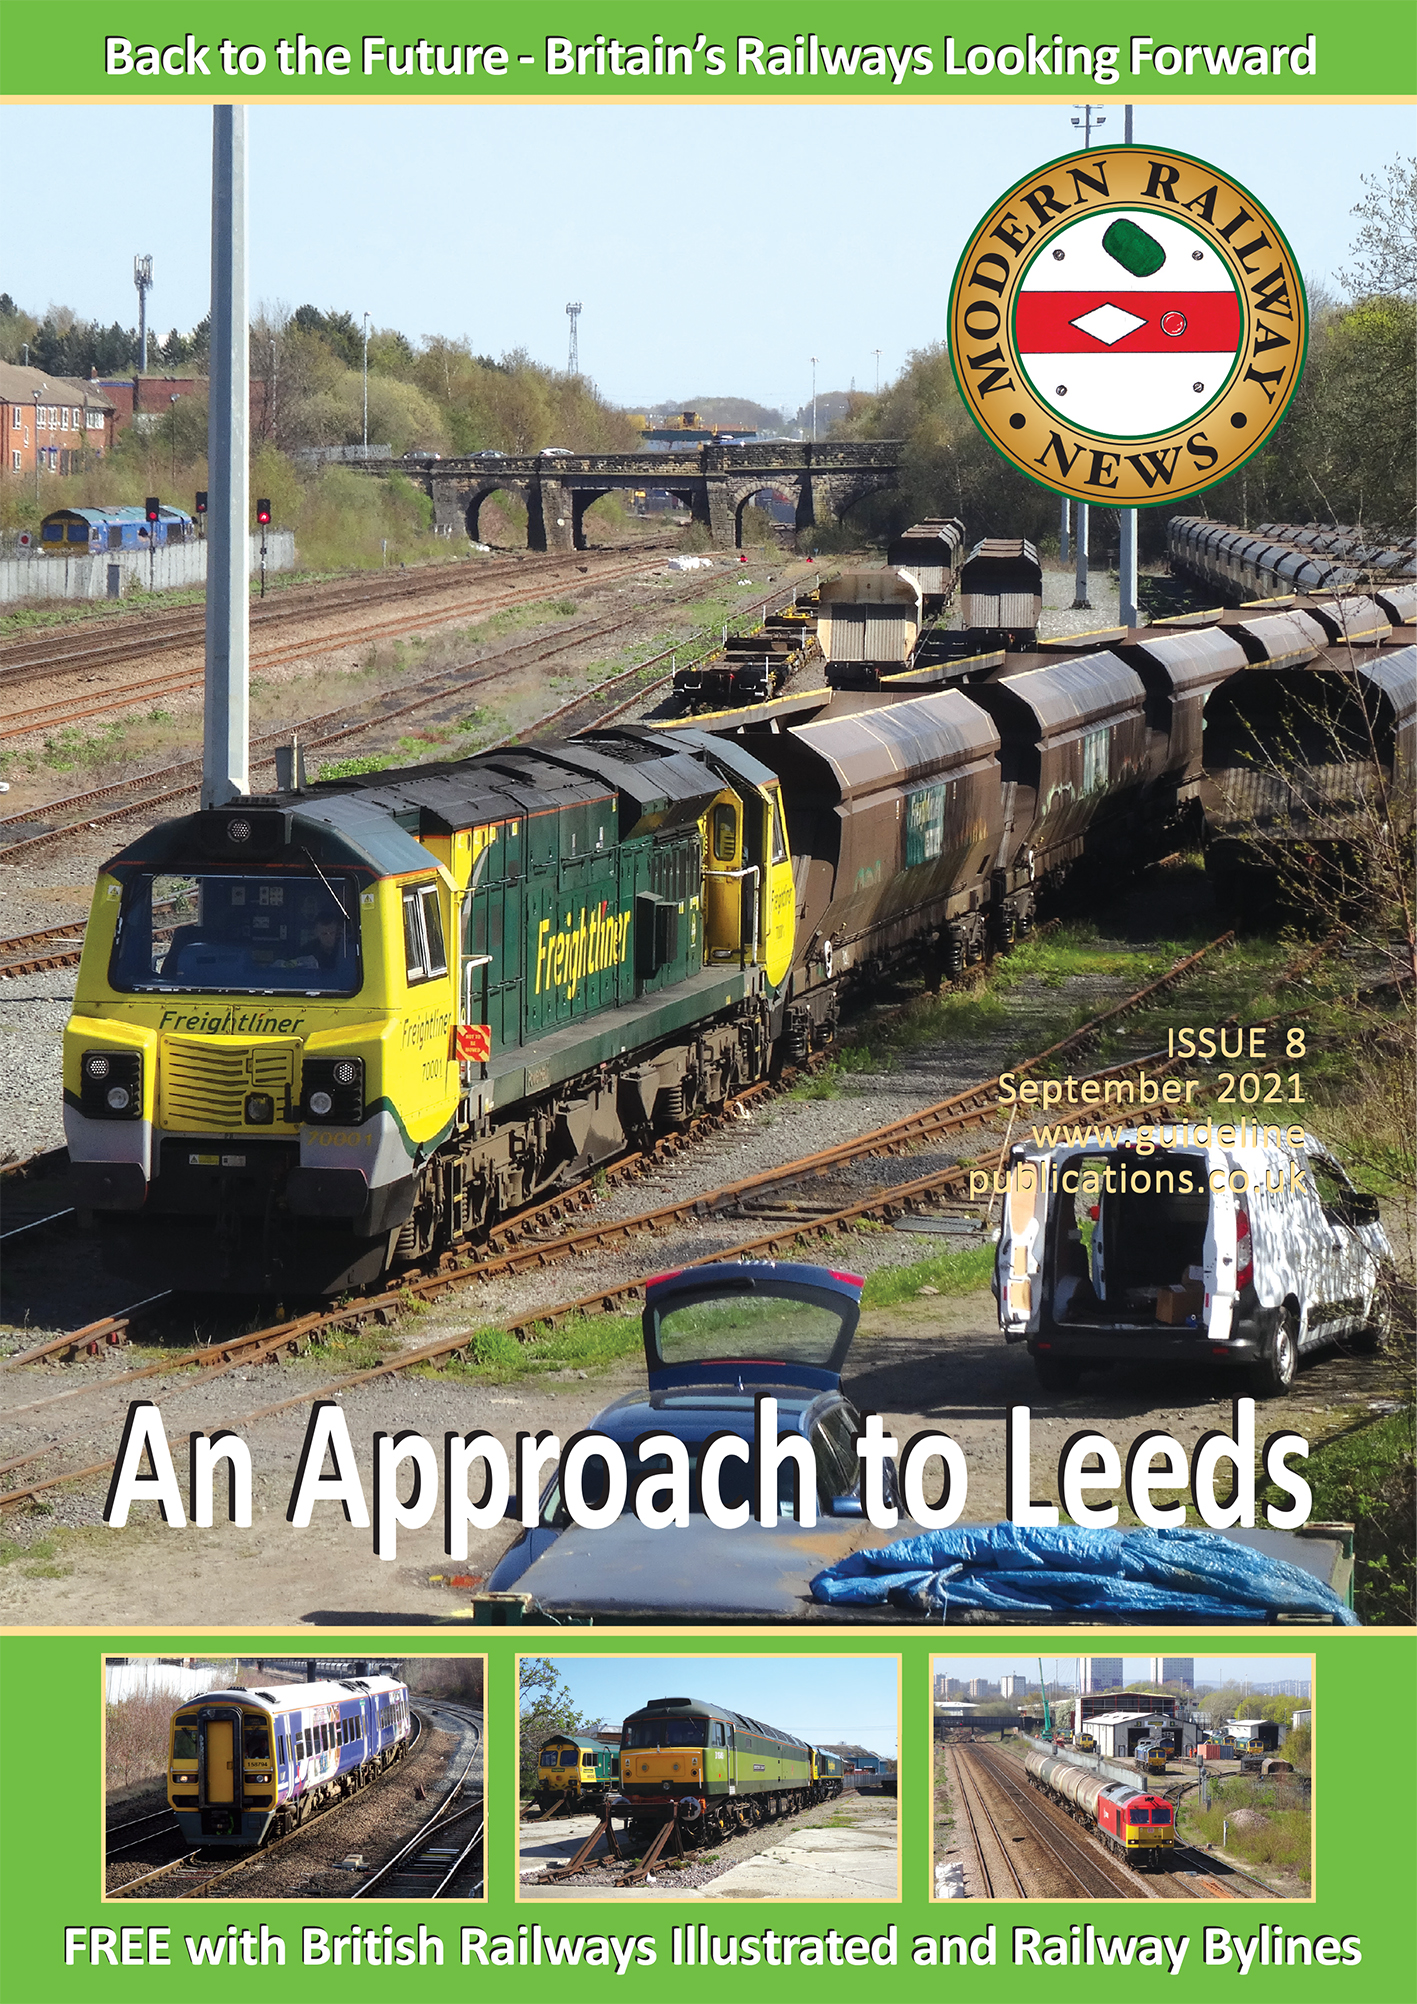 Guideline Publications Ltd Modern Railway News Issue 8 - Free Digital issue Sept 21 Issue 